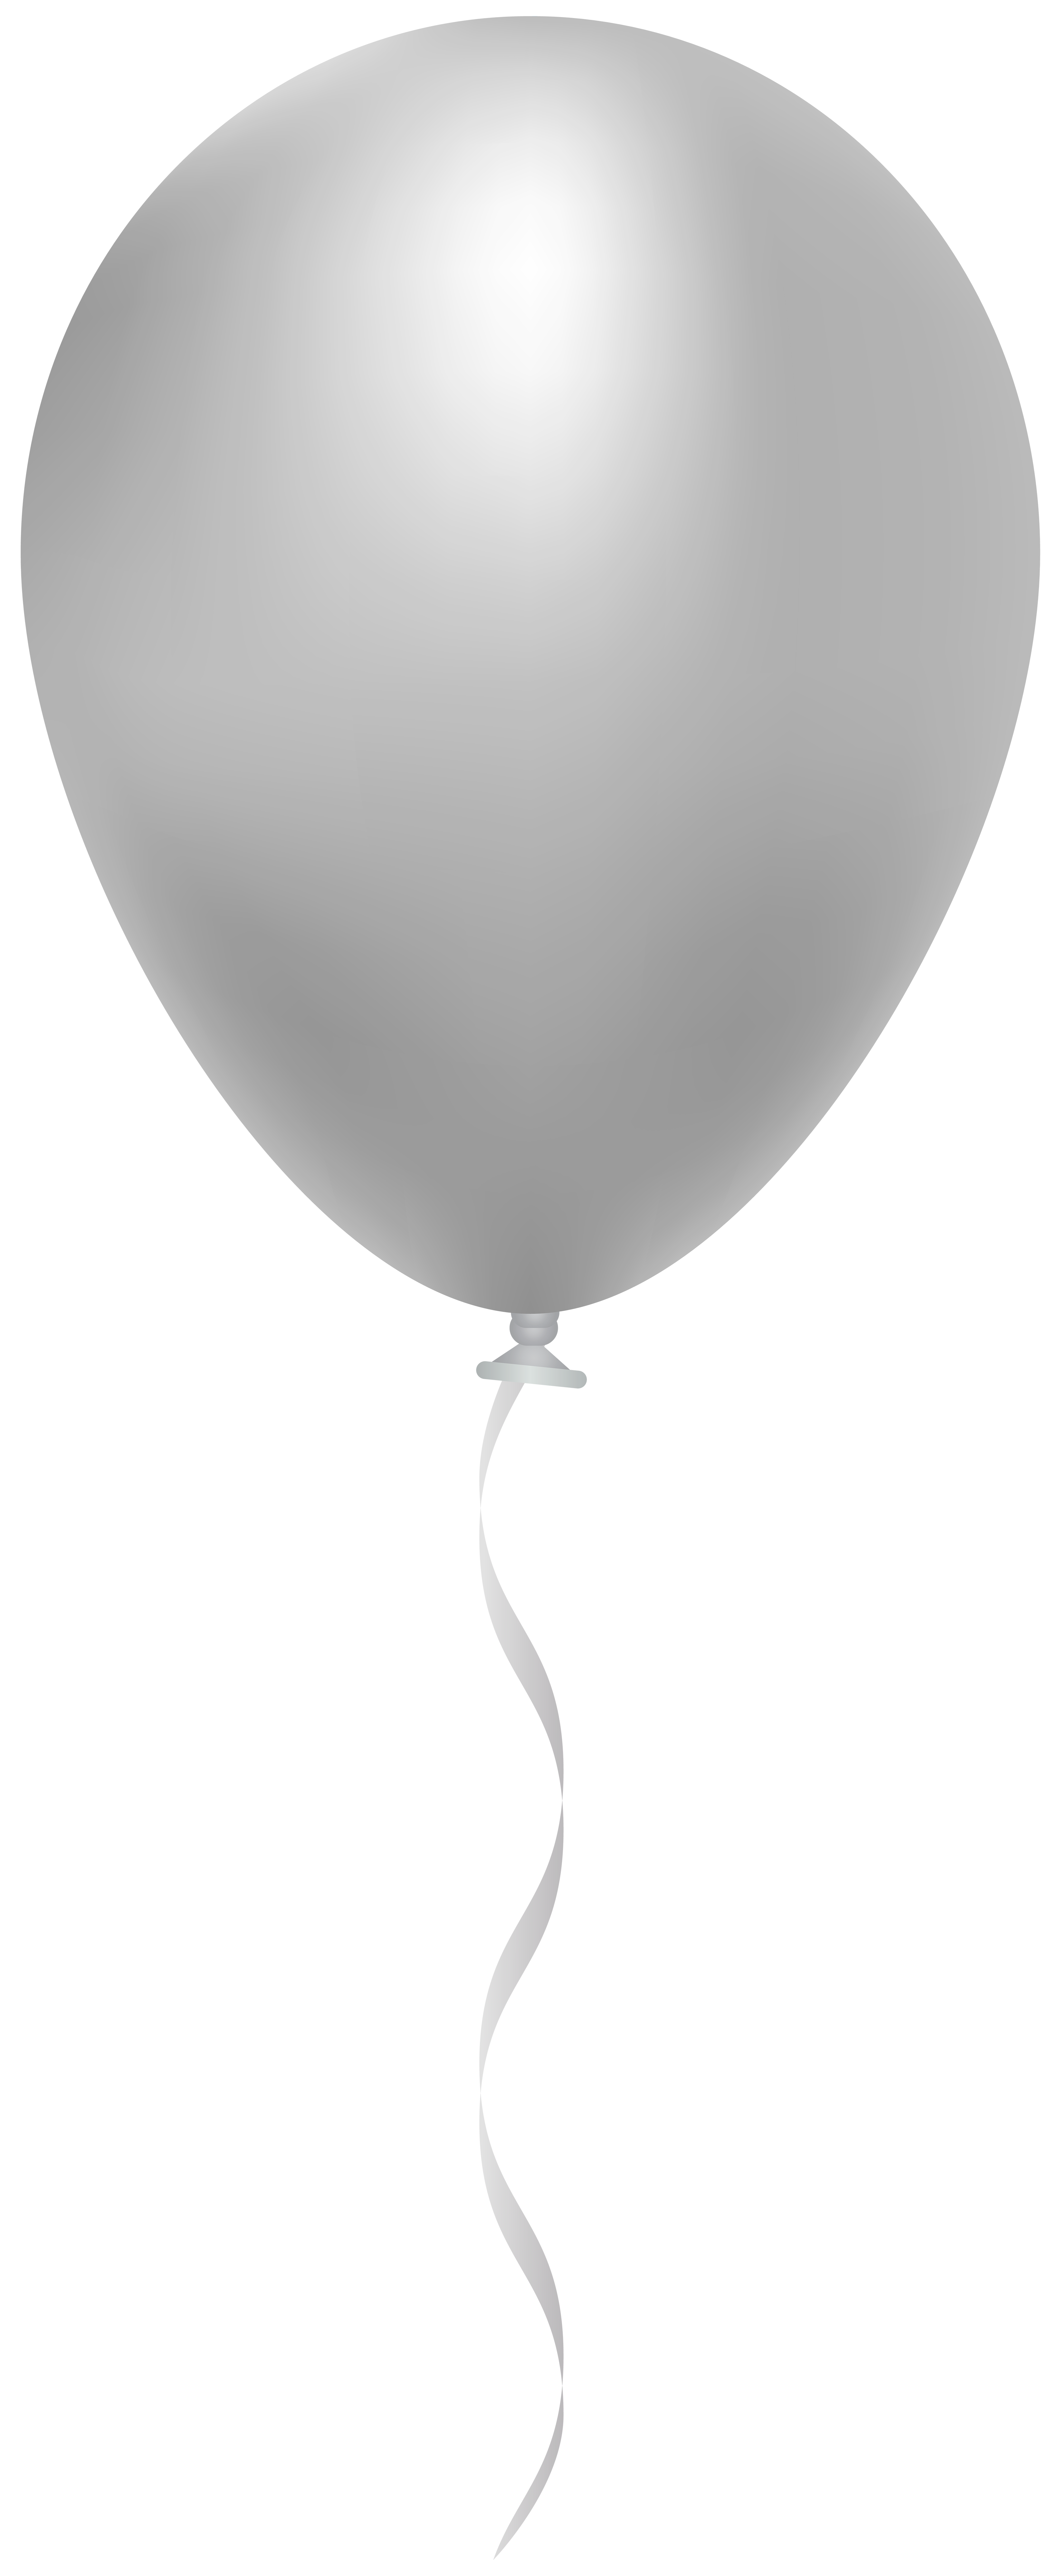 White Balloon PNG Clip Art Image | Gallery Yopriceville - High-Quality